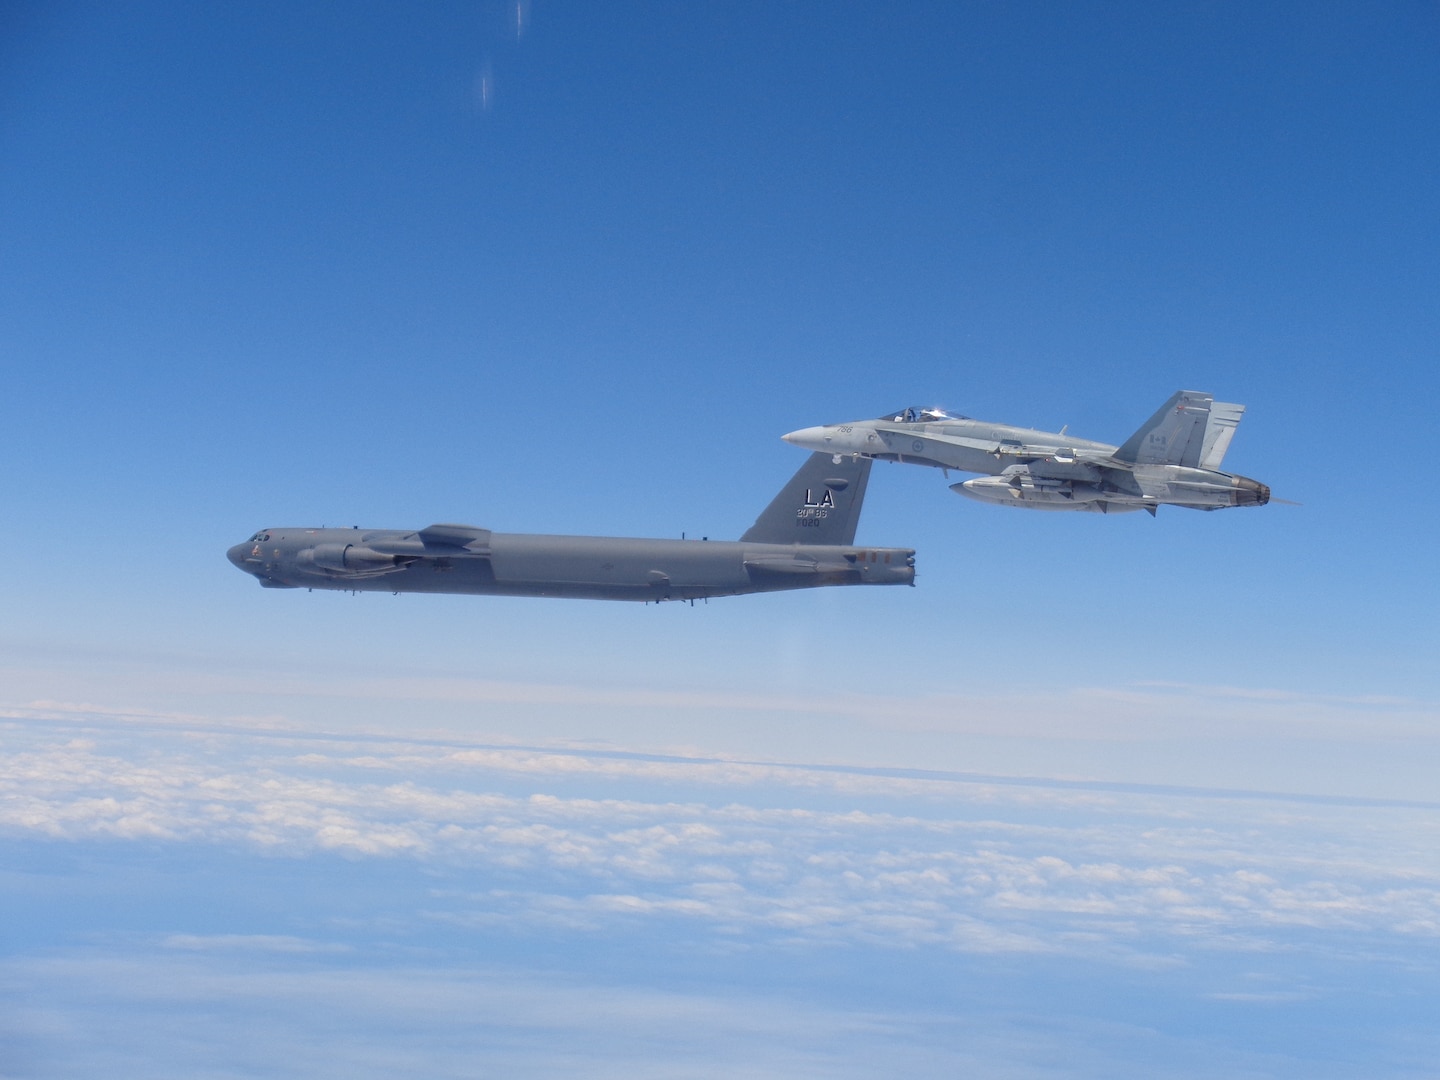 A Canadian NORAD Region CF-18 Hornet practices intercept and escort procedures alongside a United States Air Force (USAF) B-52 Stratofortress bomber during Exercise VIGILANT SHIELD 17-1, June 15-16, 2017.
